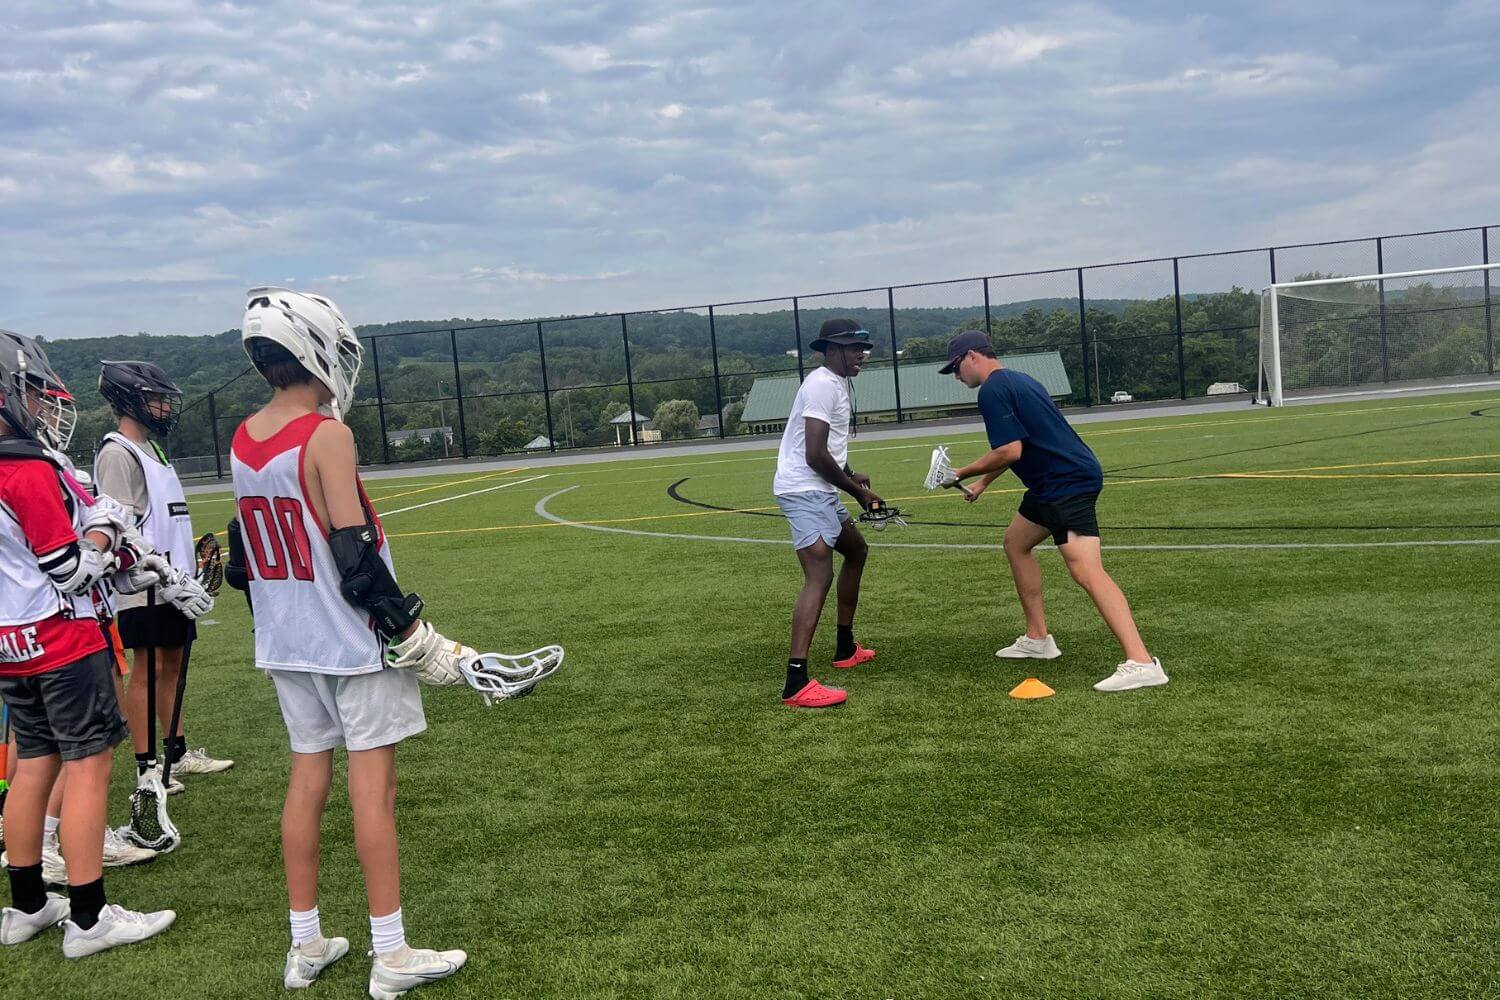 Two lacrosse coaches are giving a tutorial for a lacrosse play during practice